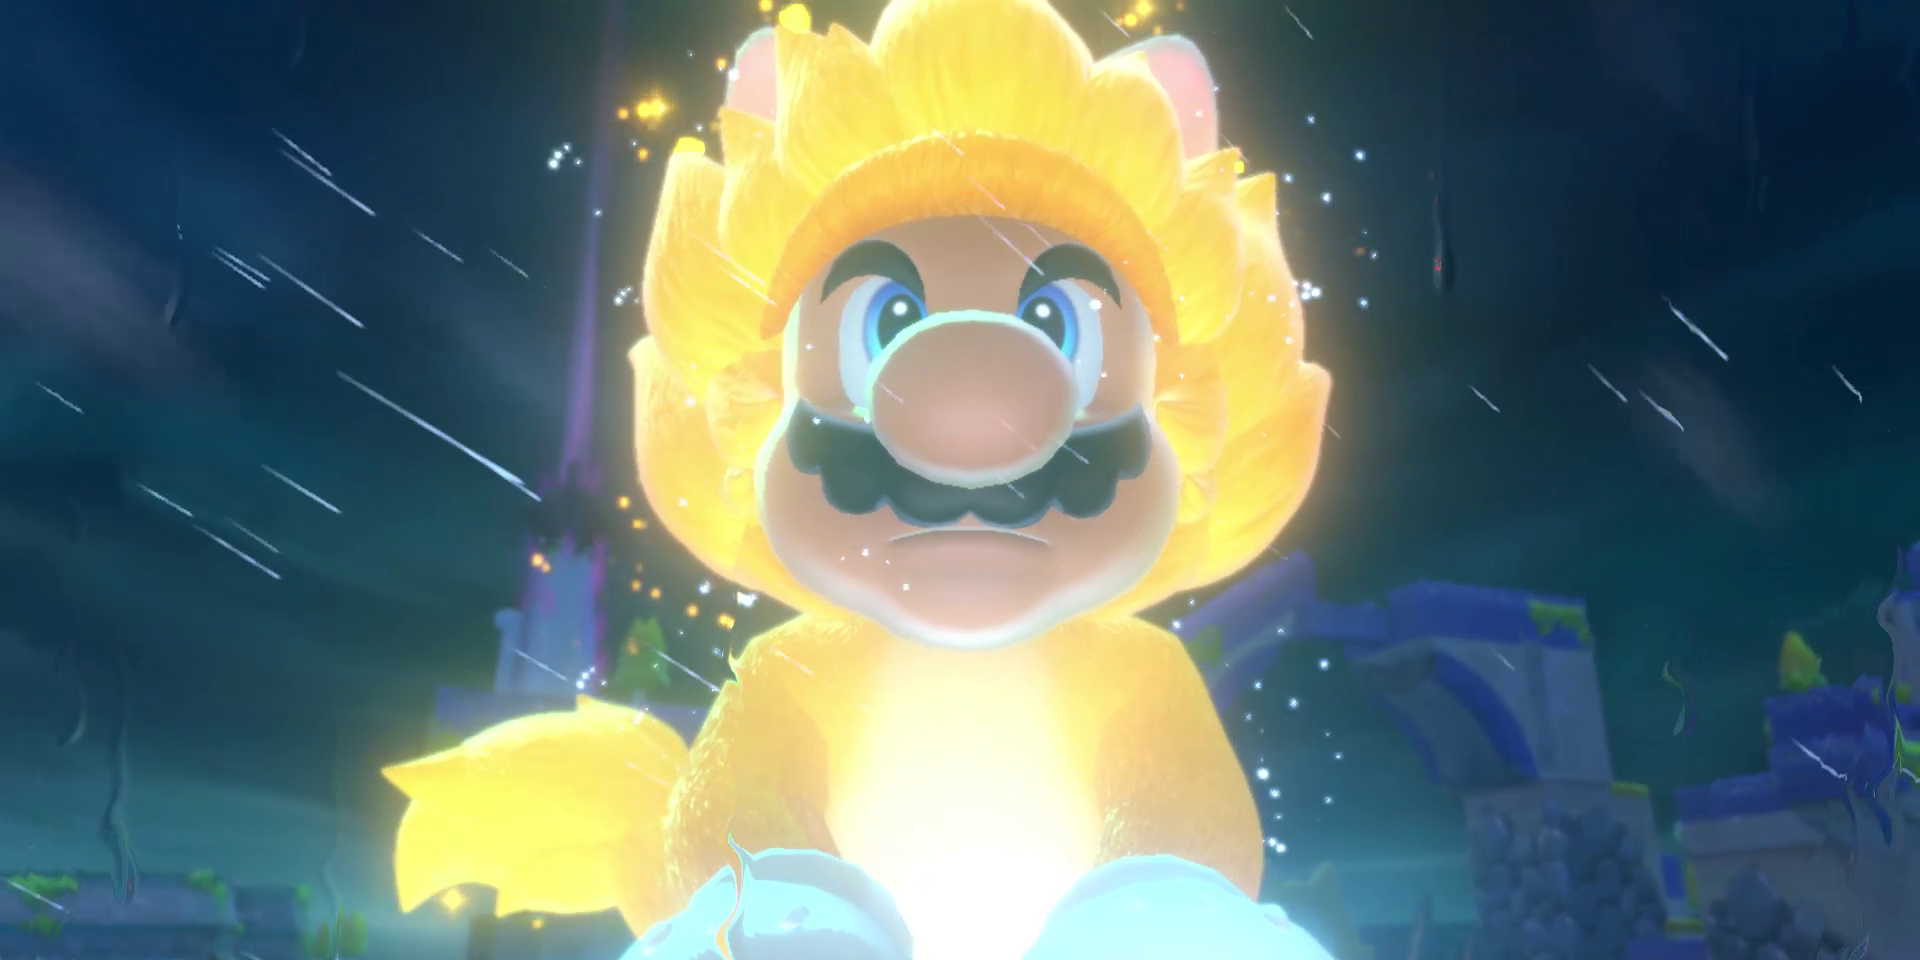 Super Mario 3D World' is the best reason to own a Wii U